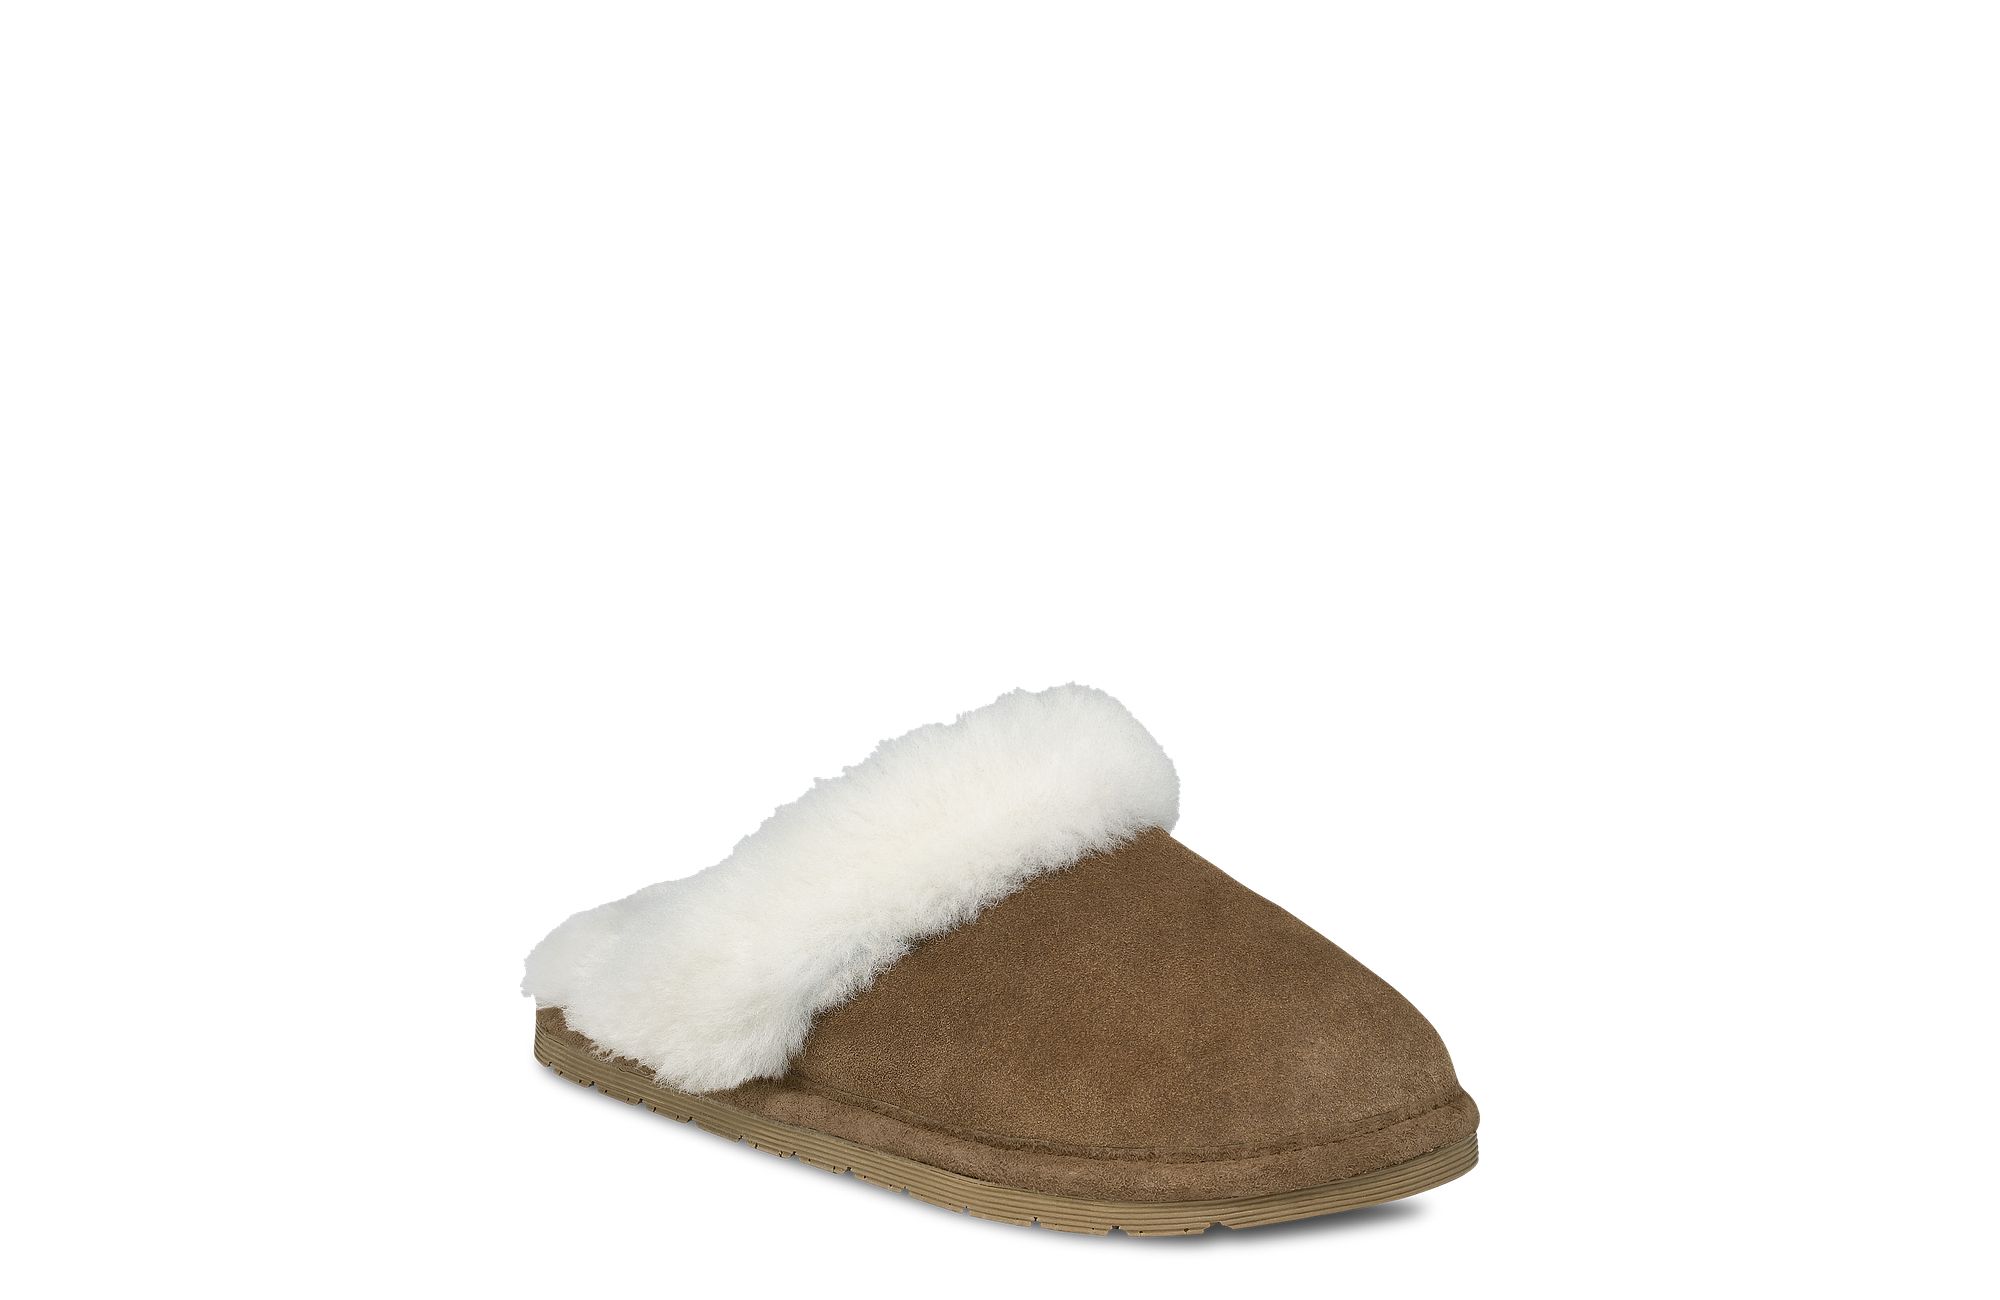 Brug for Luske Nominering Fleece-Lined Suede Scuff Slippers | Red Wing